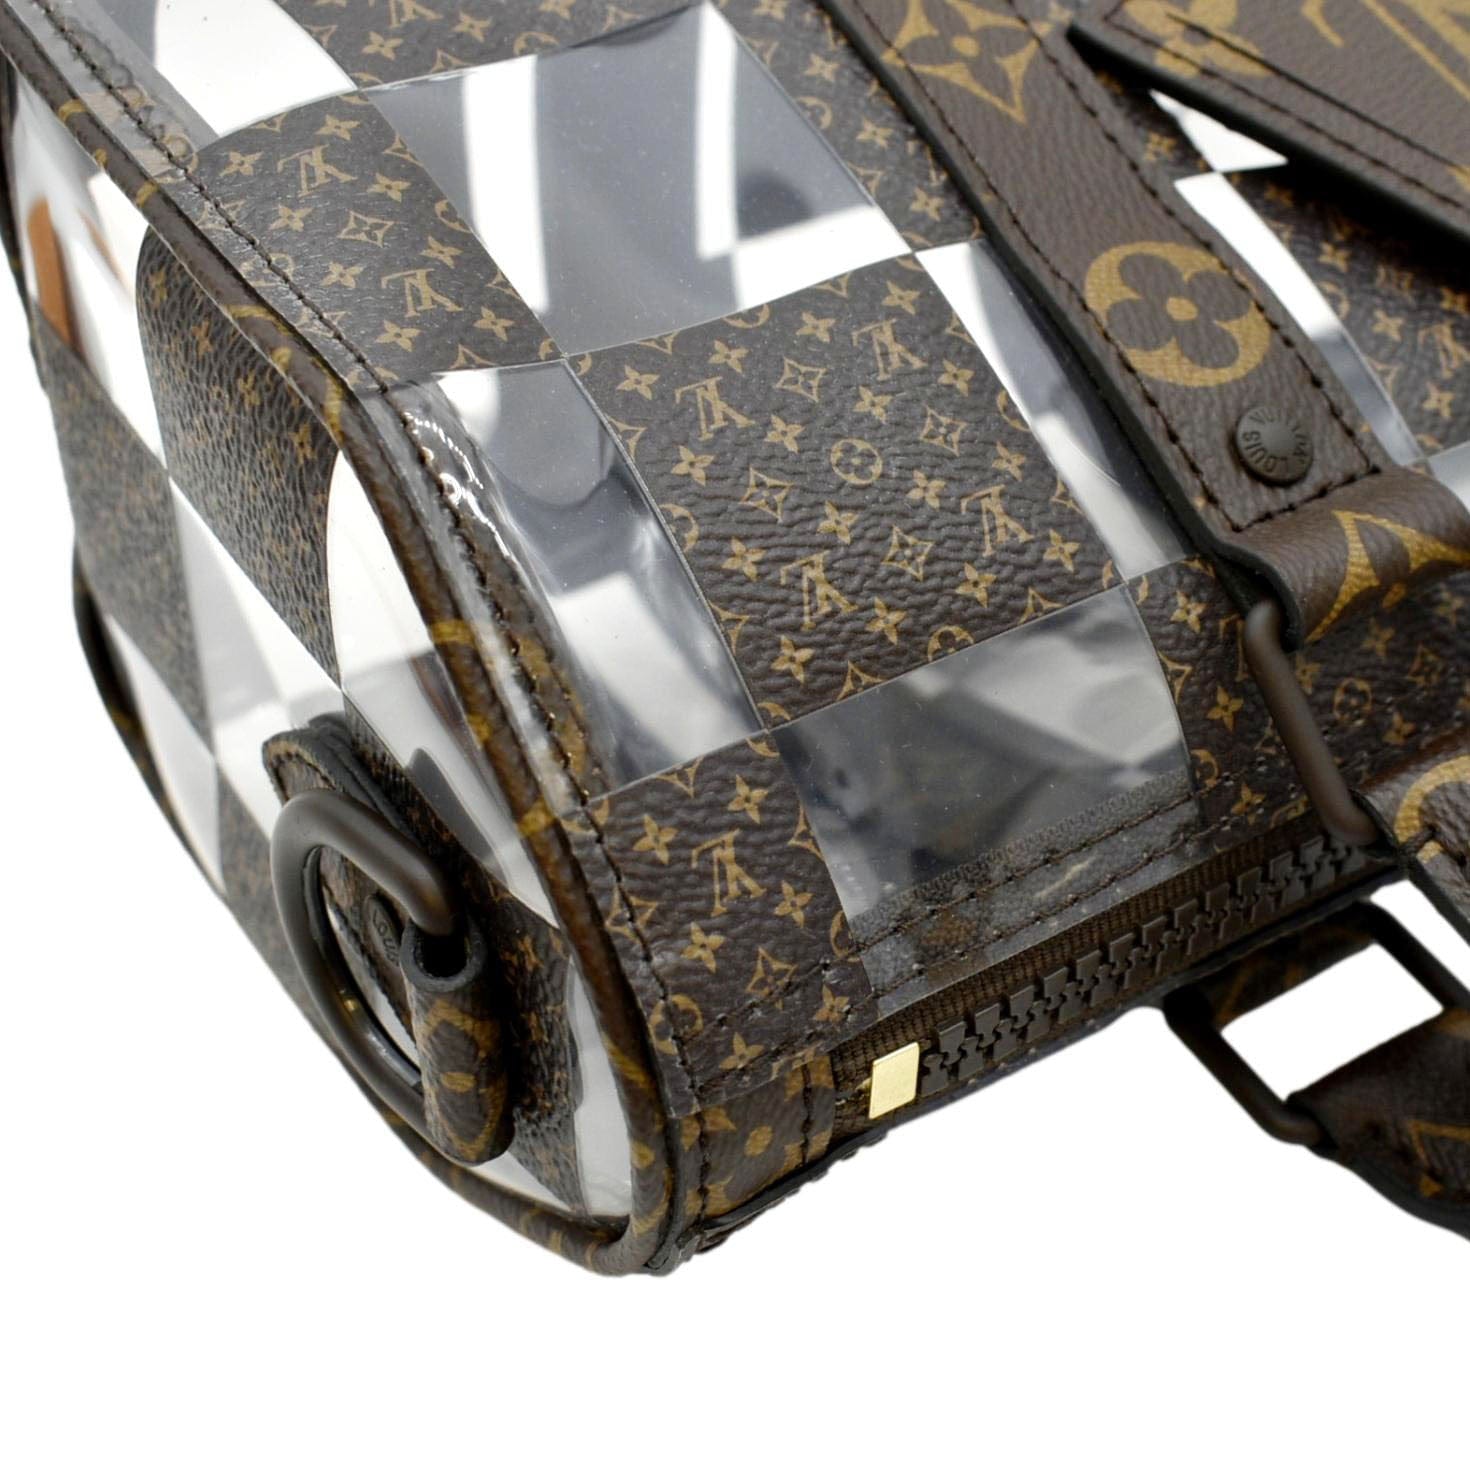 Louis Vuitton Chess-Patterned Keepall 25